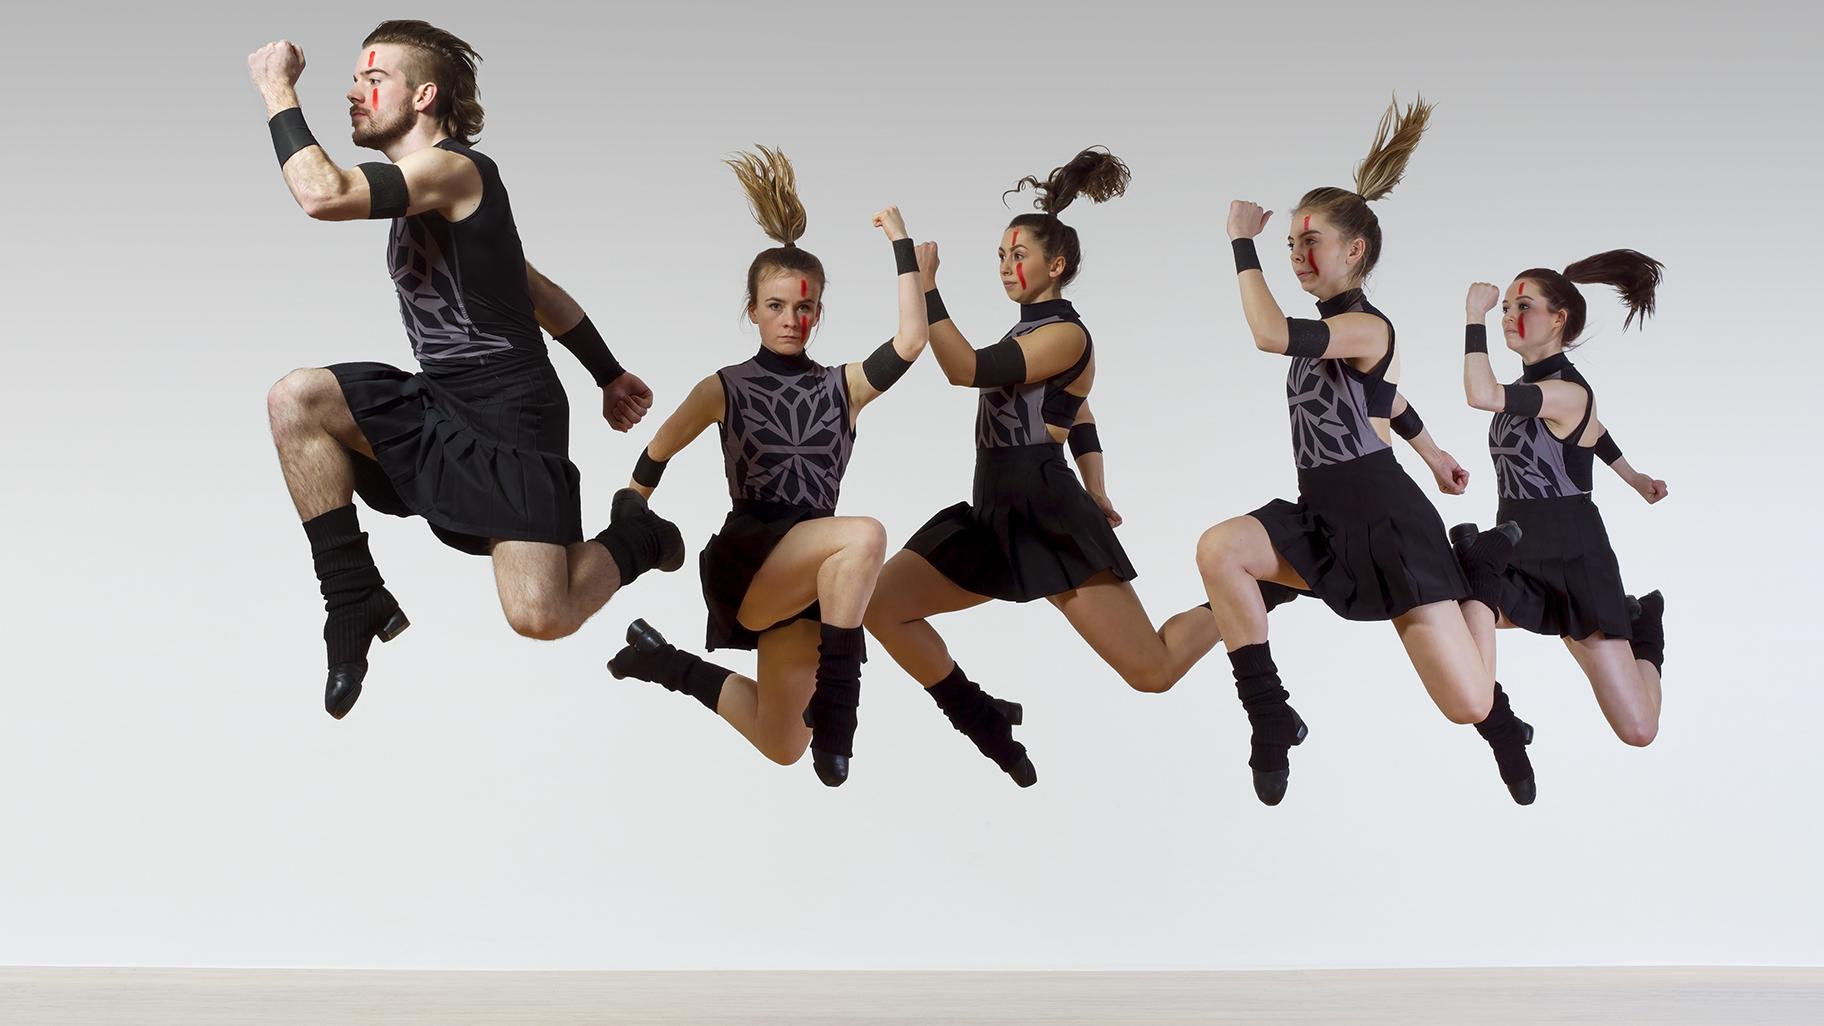 Chicago’s Trinity Irish Dance Company, pictured in a promotional photo, returned to the Auditorium Theatre Feb. 5, 2022, for a dynamic and thunderous performance. (Courtesy of Lois Greenfield)